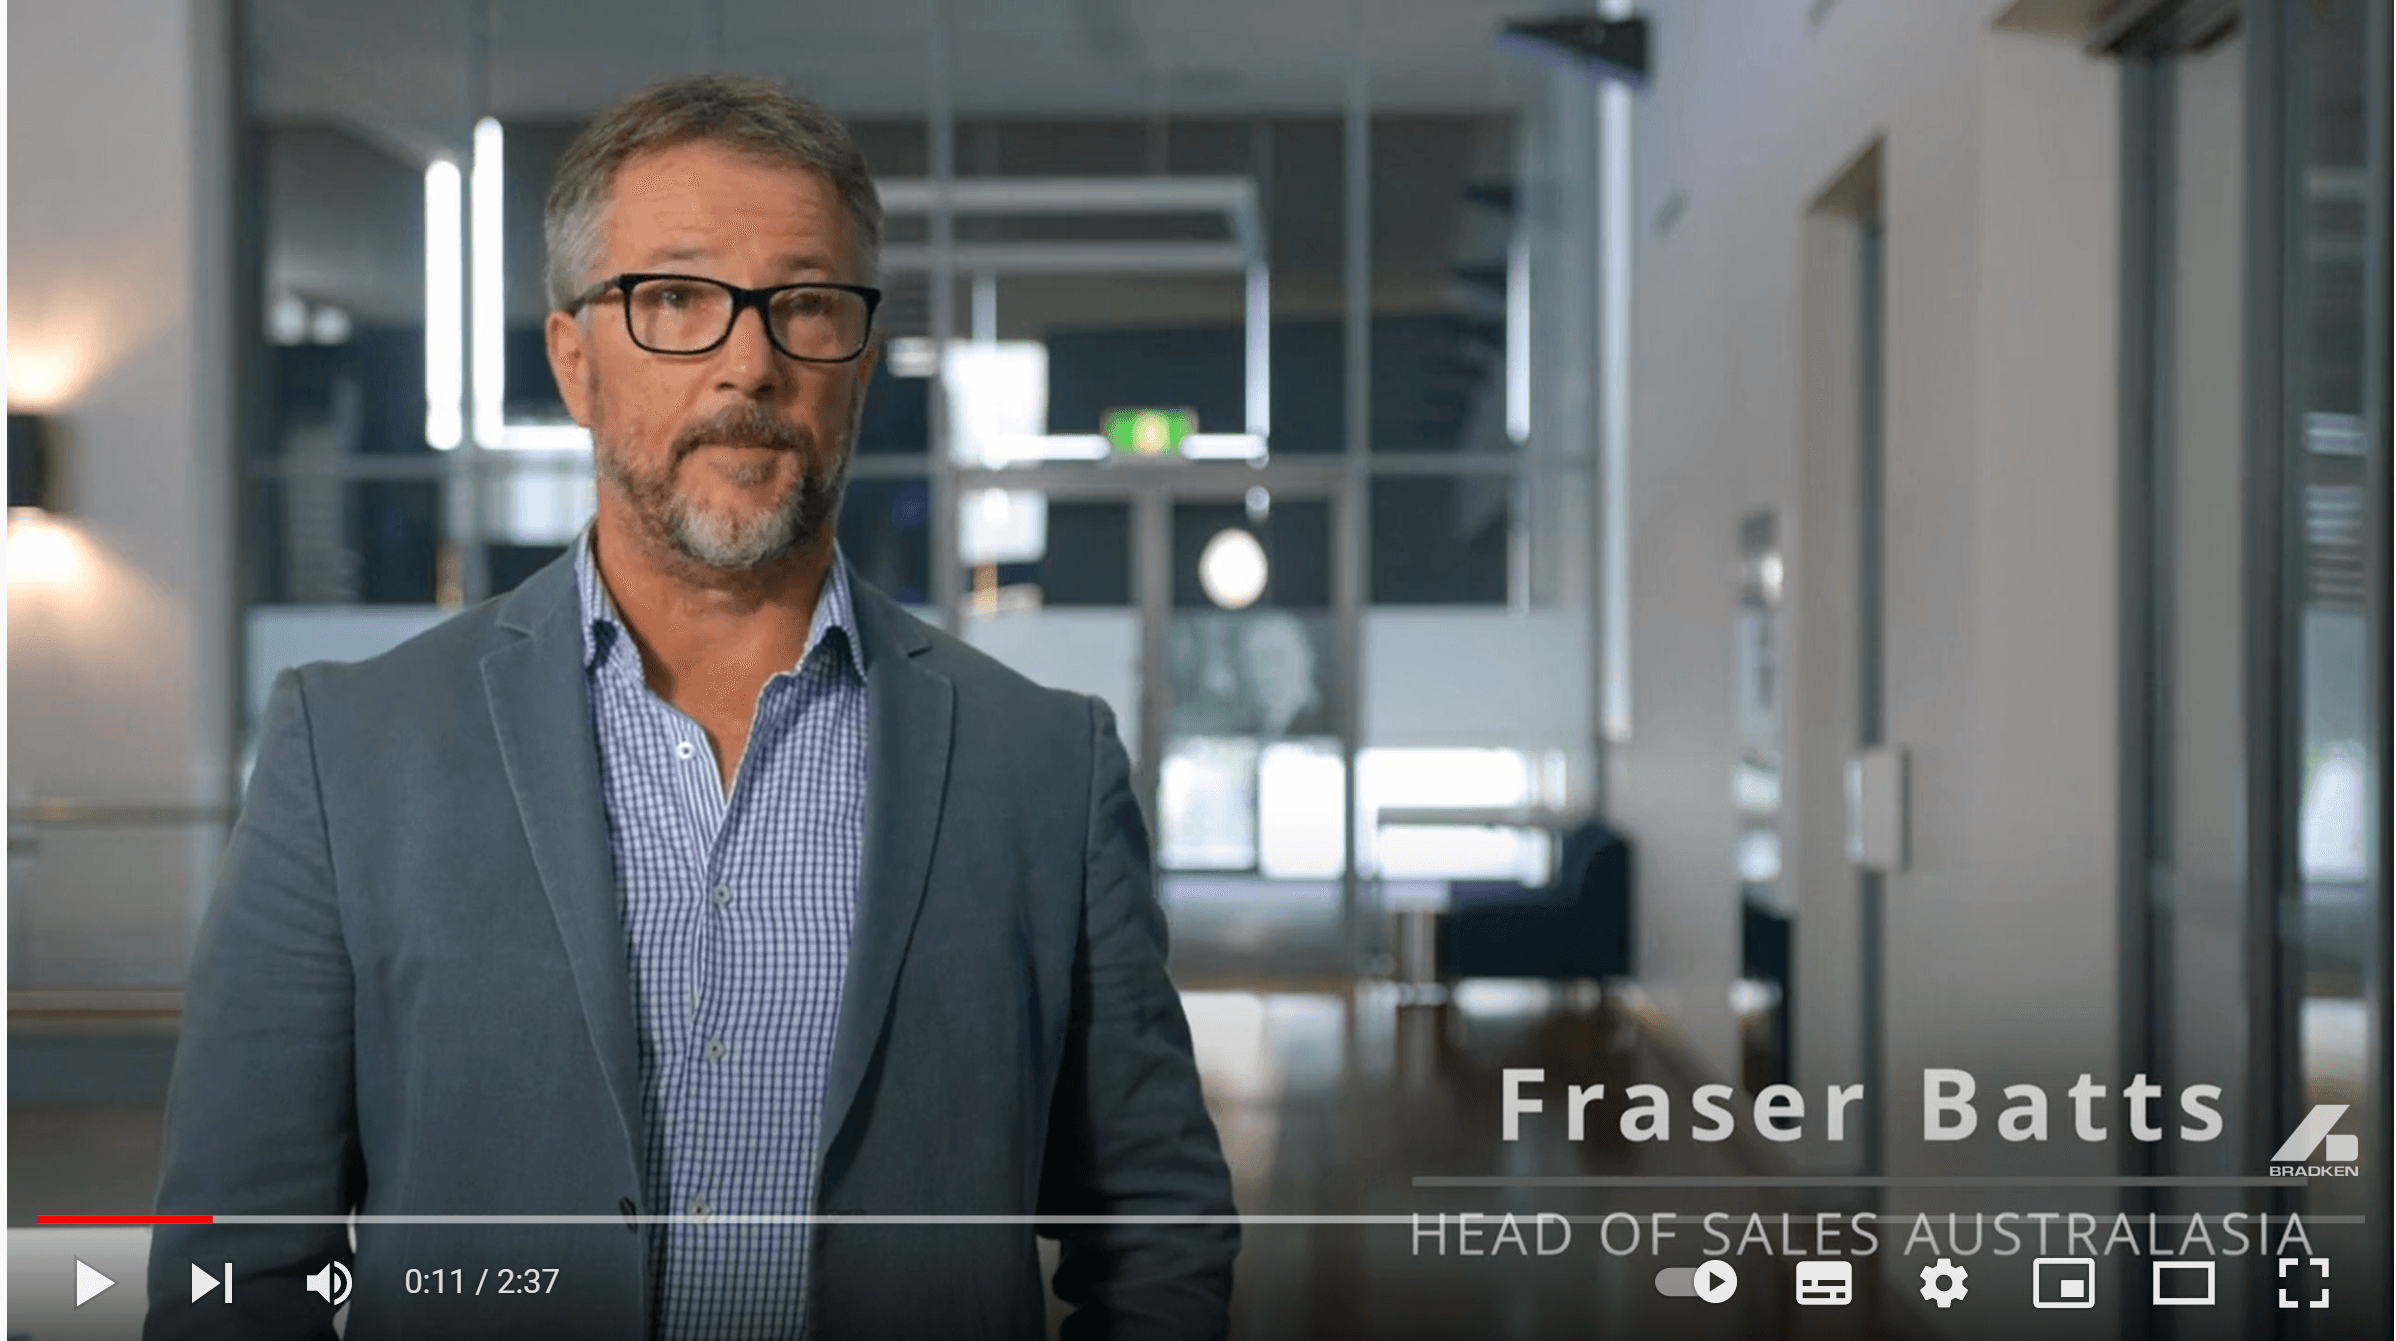   Watch Fraser Batts, Australasian Sales Manager, as he discusses the initial development of our Xuzhou operations and its success.